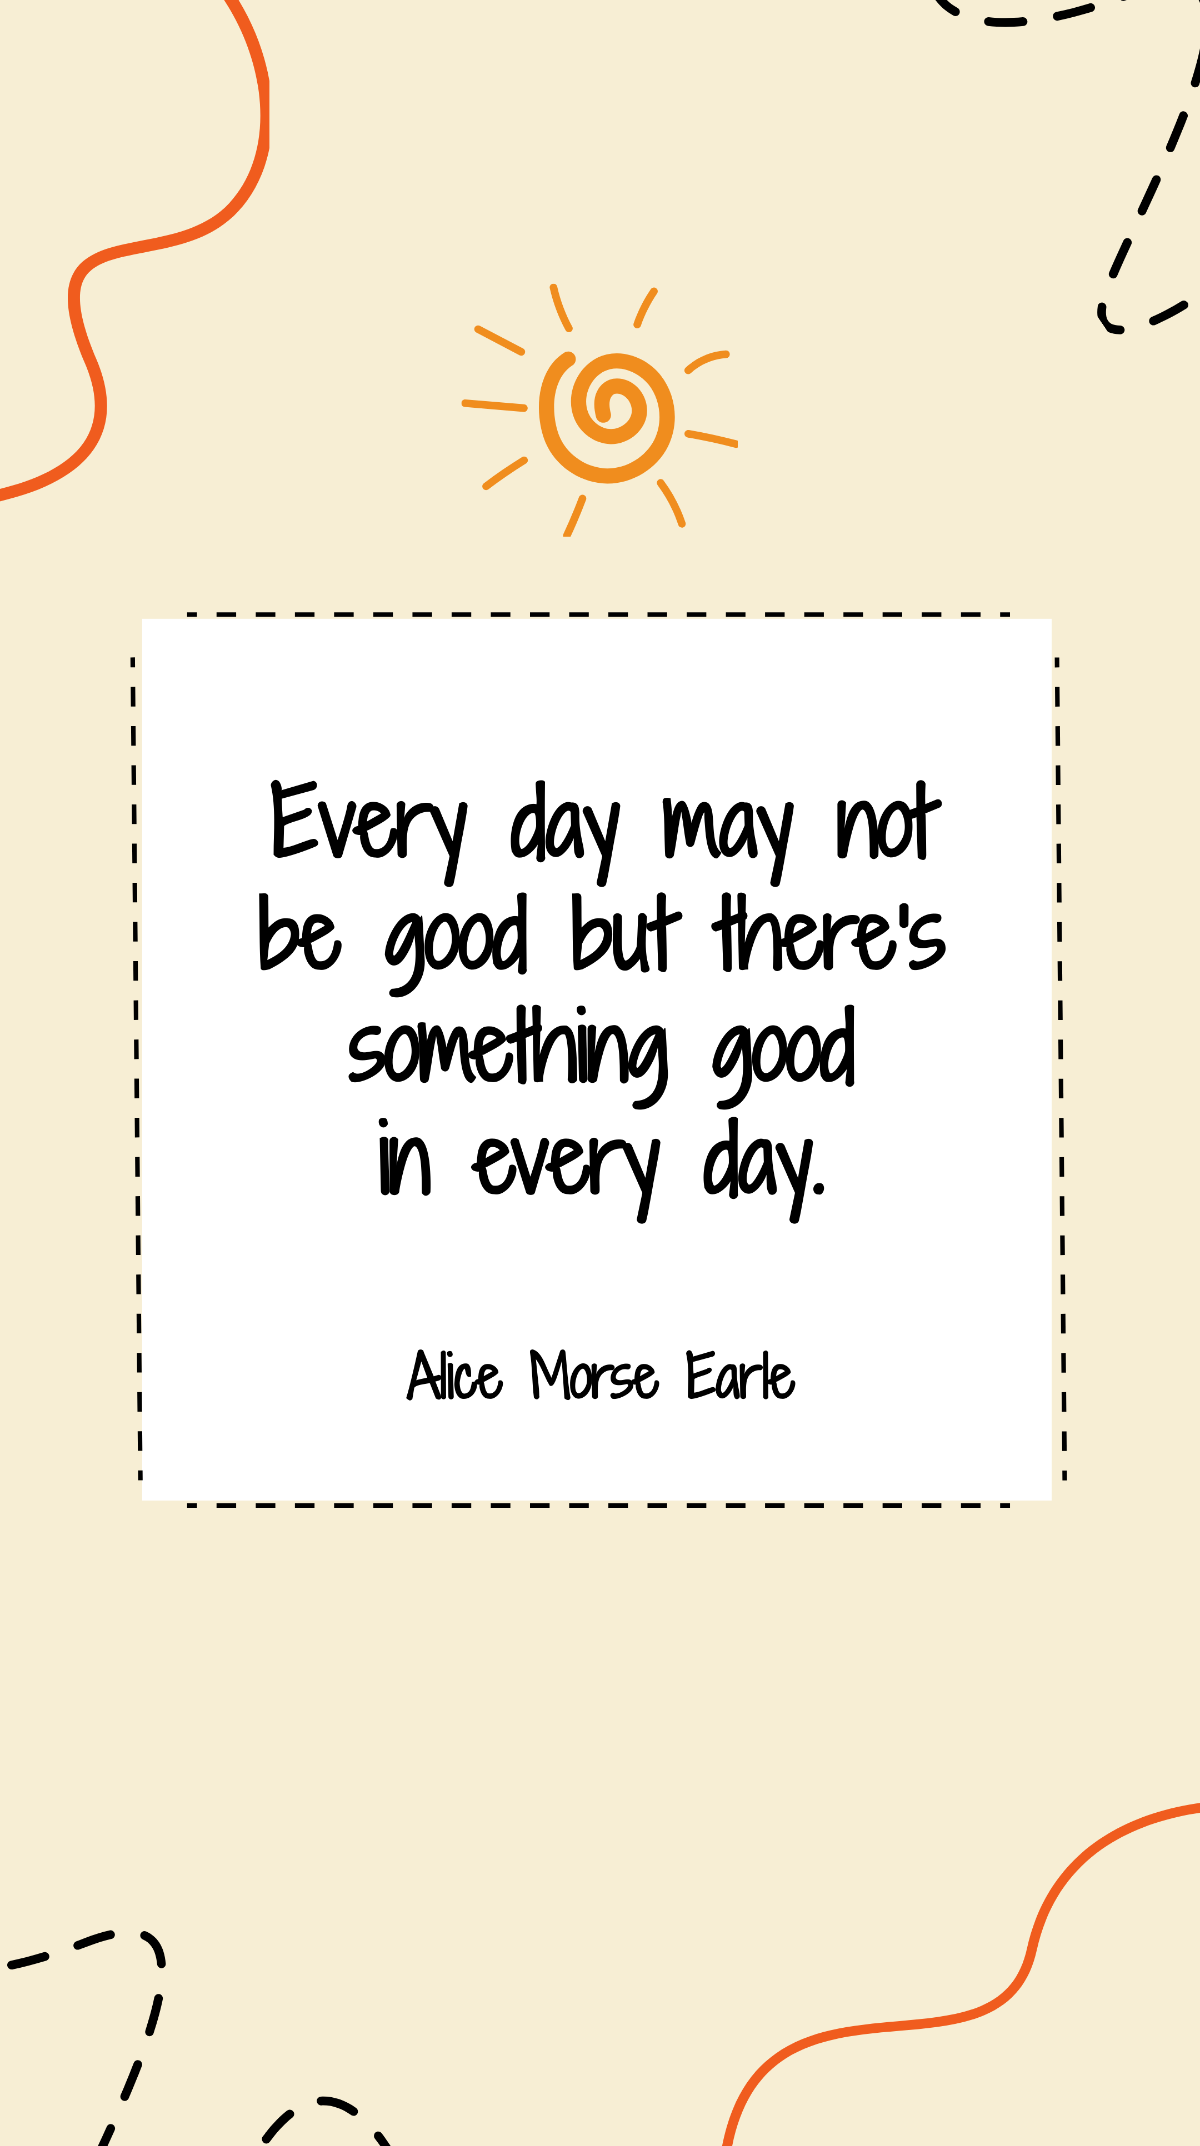 Alice Morse Earle - Every day may not be good but there's something good in every day.